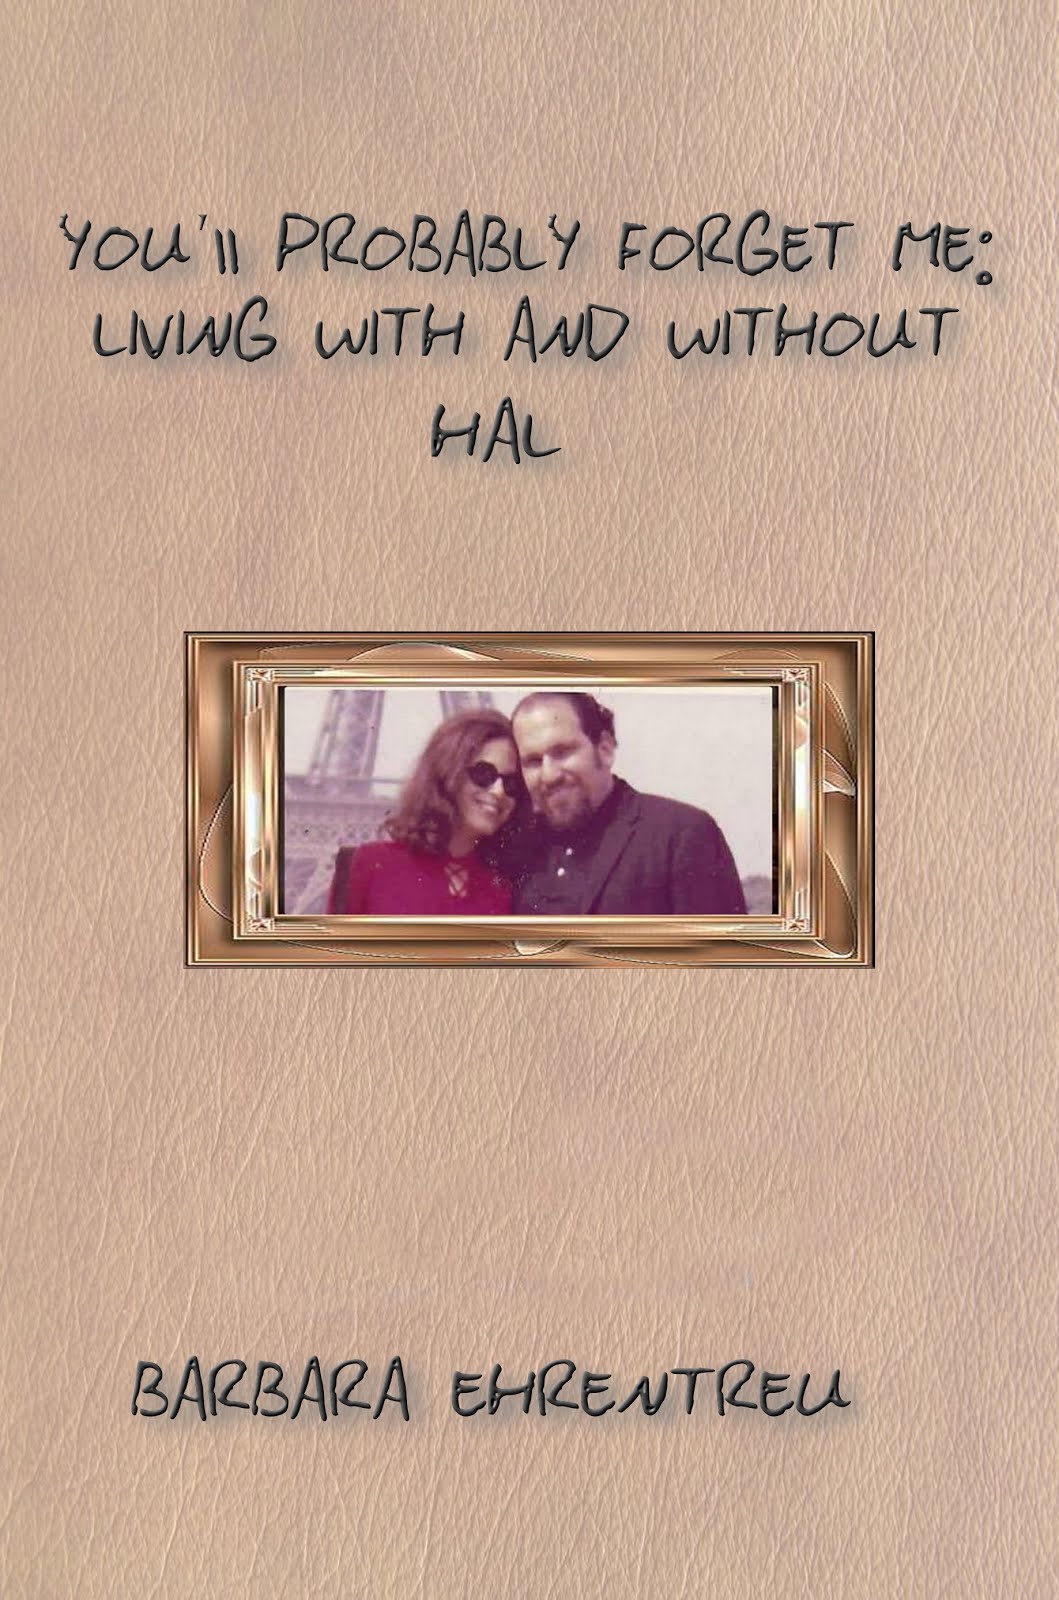 You'll Probably Forget Me: Living With and Without Hal